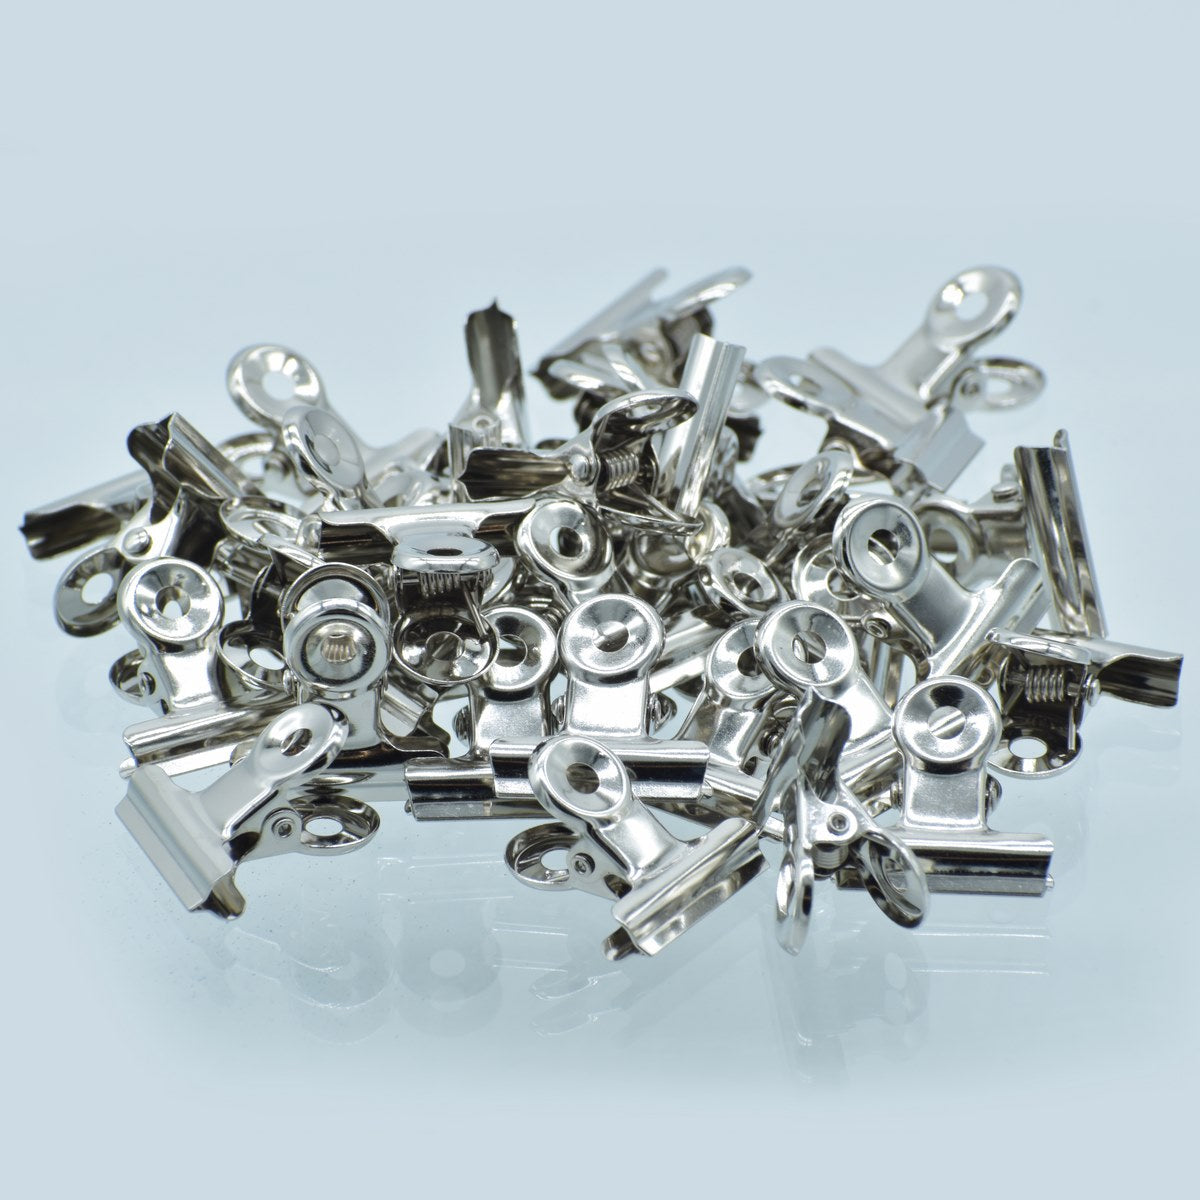 jags-mumbai Clip CircleLink: 36-Piece Box of Stainless Steel 22mm Round Clips - Secure and Organize with Precision